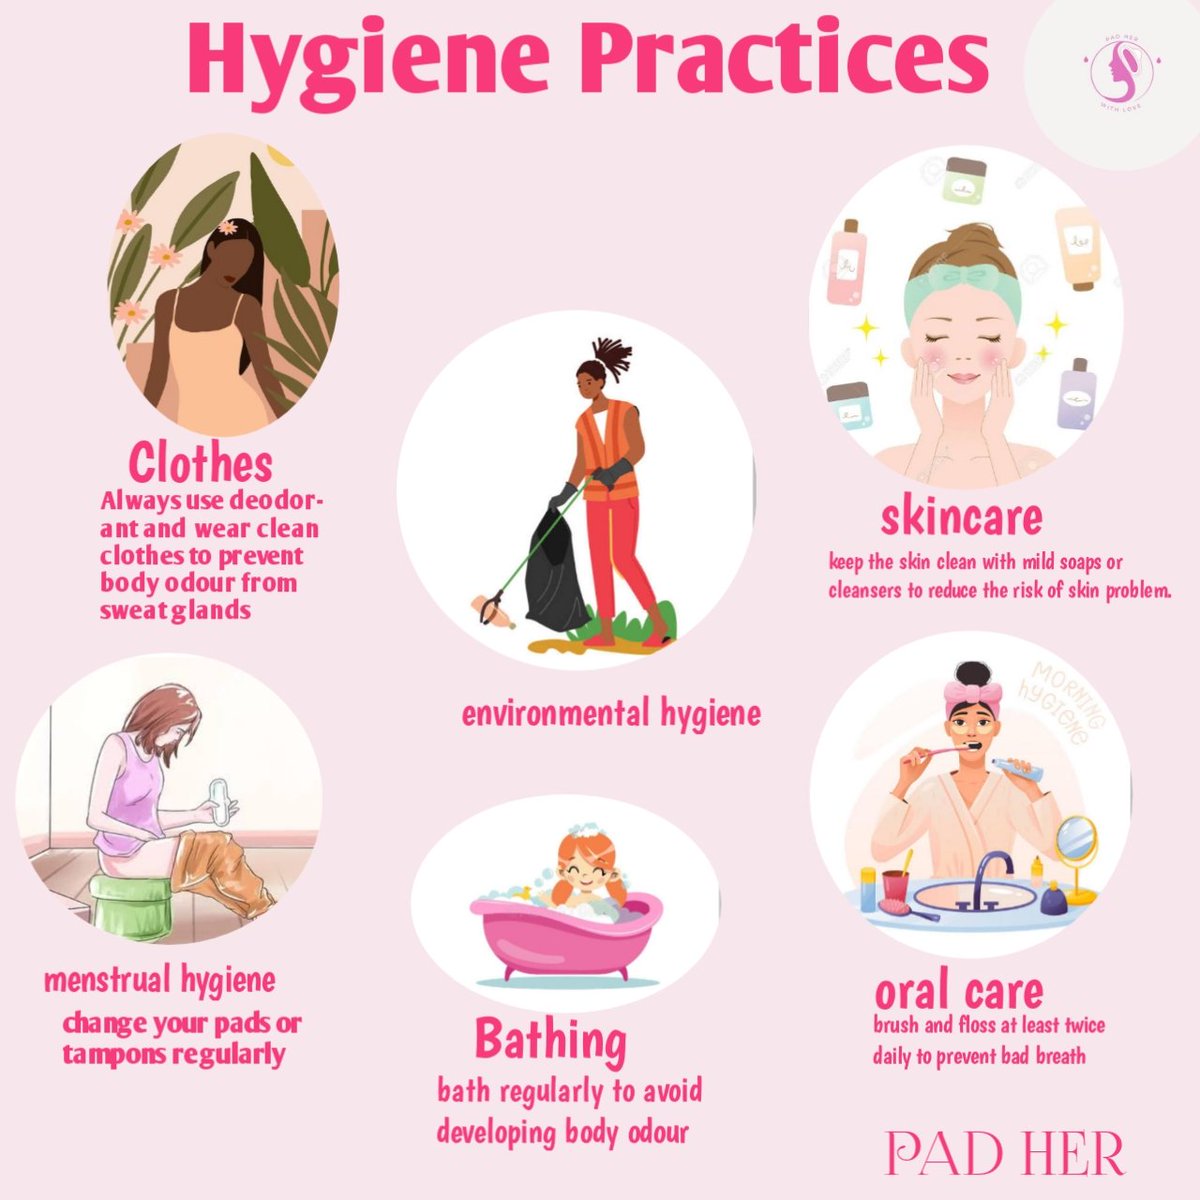 Good afternoon beautiful people 🥰

What are Tuesdays without tips 
✨ #TipsTuesday ✨ 
This week's tip: Make hygiene a priority!
 A cleaner world starts with you.
 
Reply with your top hygiene tip and let's create a ripple effect of cleanliness. #CleanLiving #CommunityWellness'